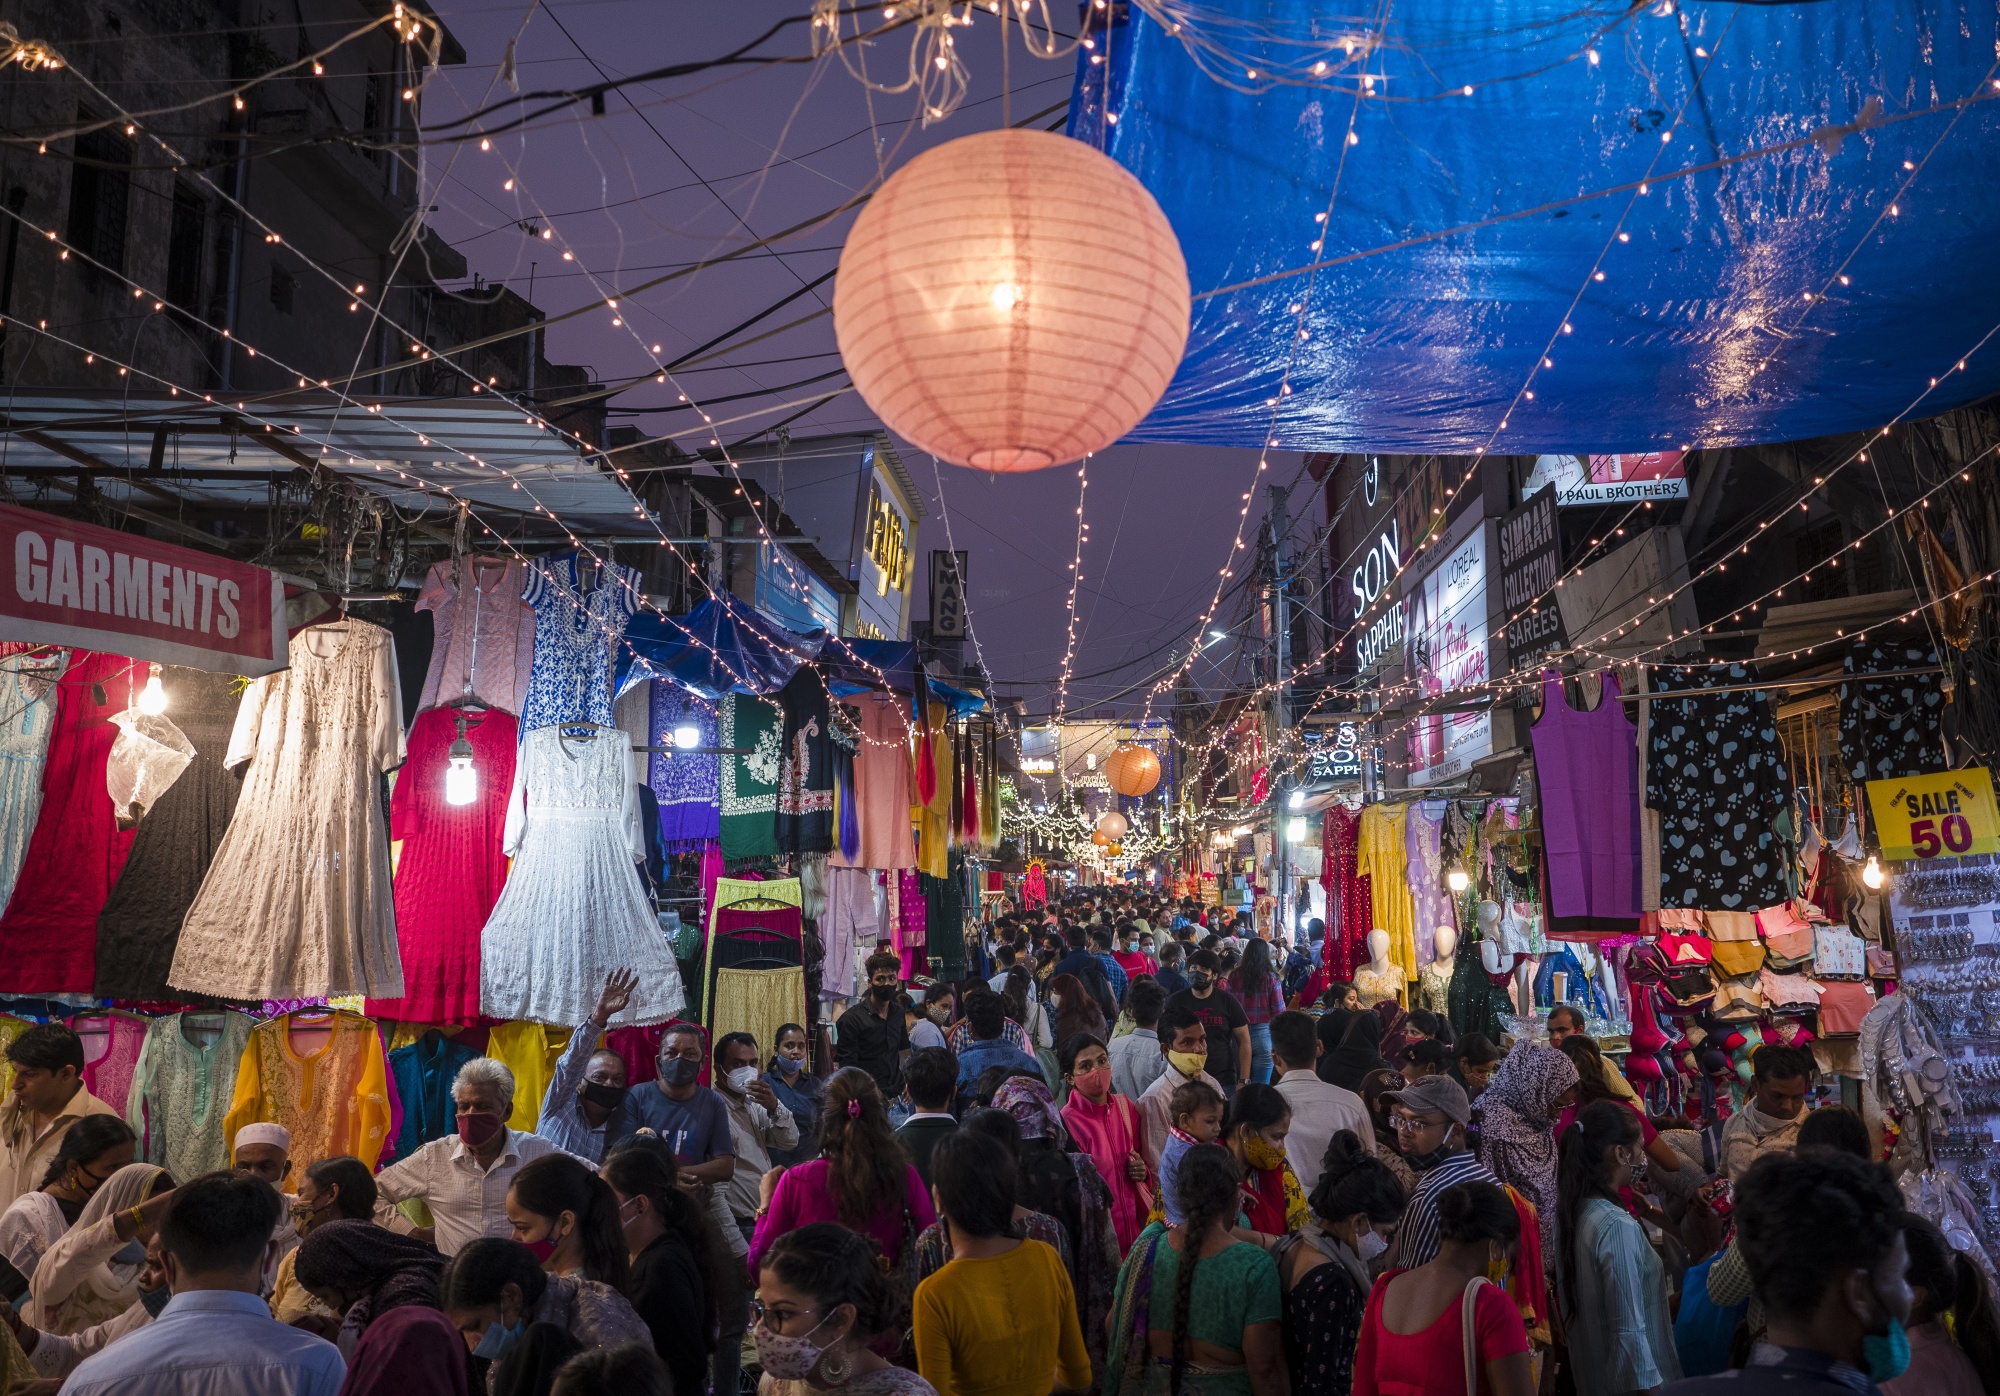 Shoppers at a market during the Diwali festival in New Delhi.